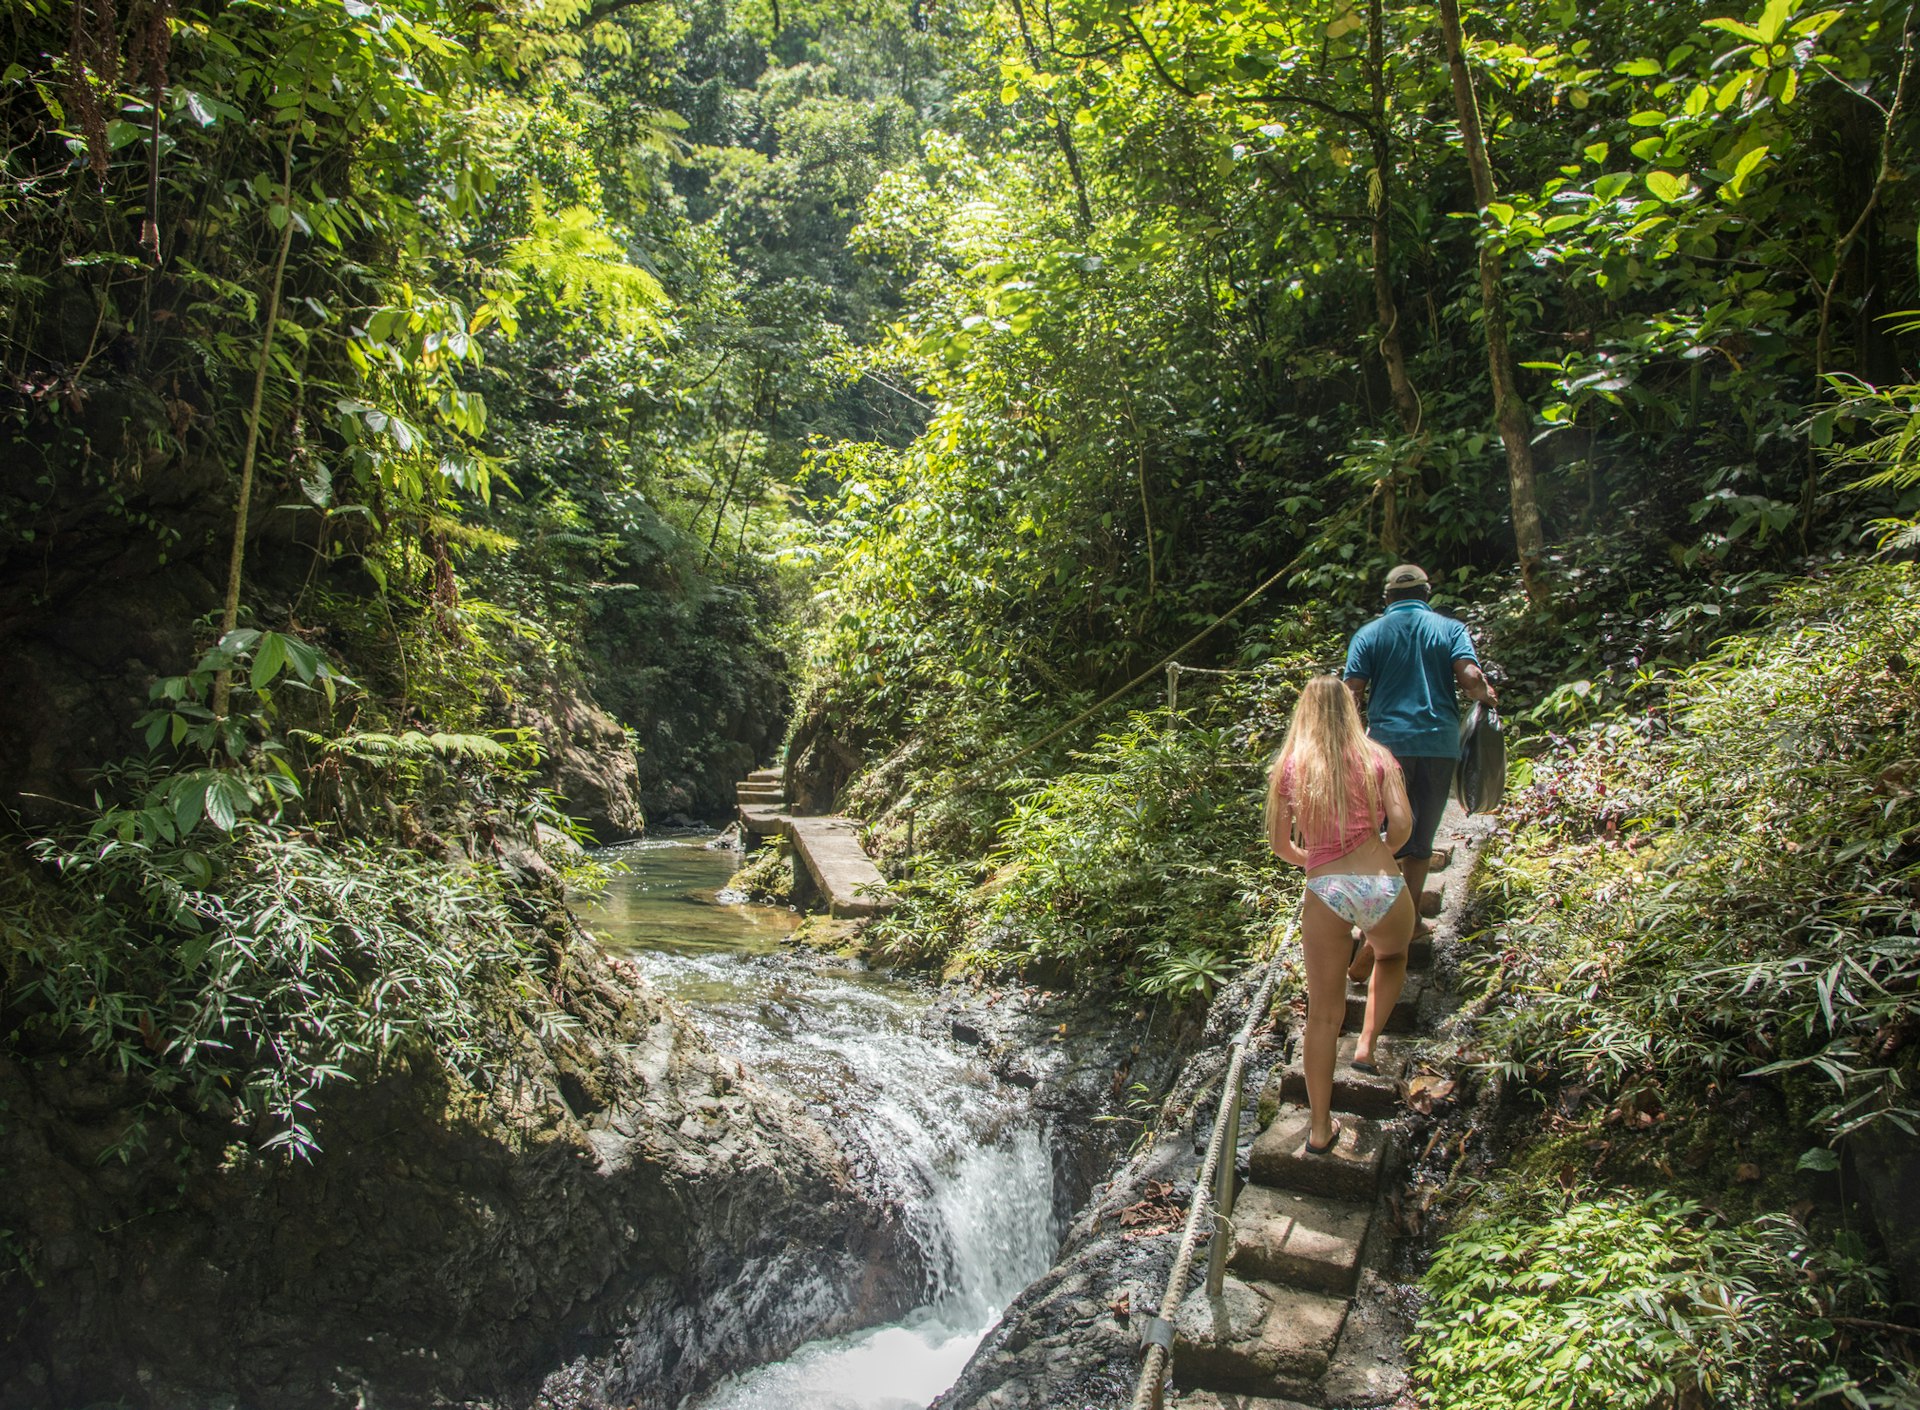 A man and woman walking along a path through the Suva rainforest in Fiji with a river flowing next to them